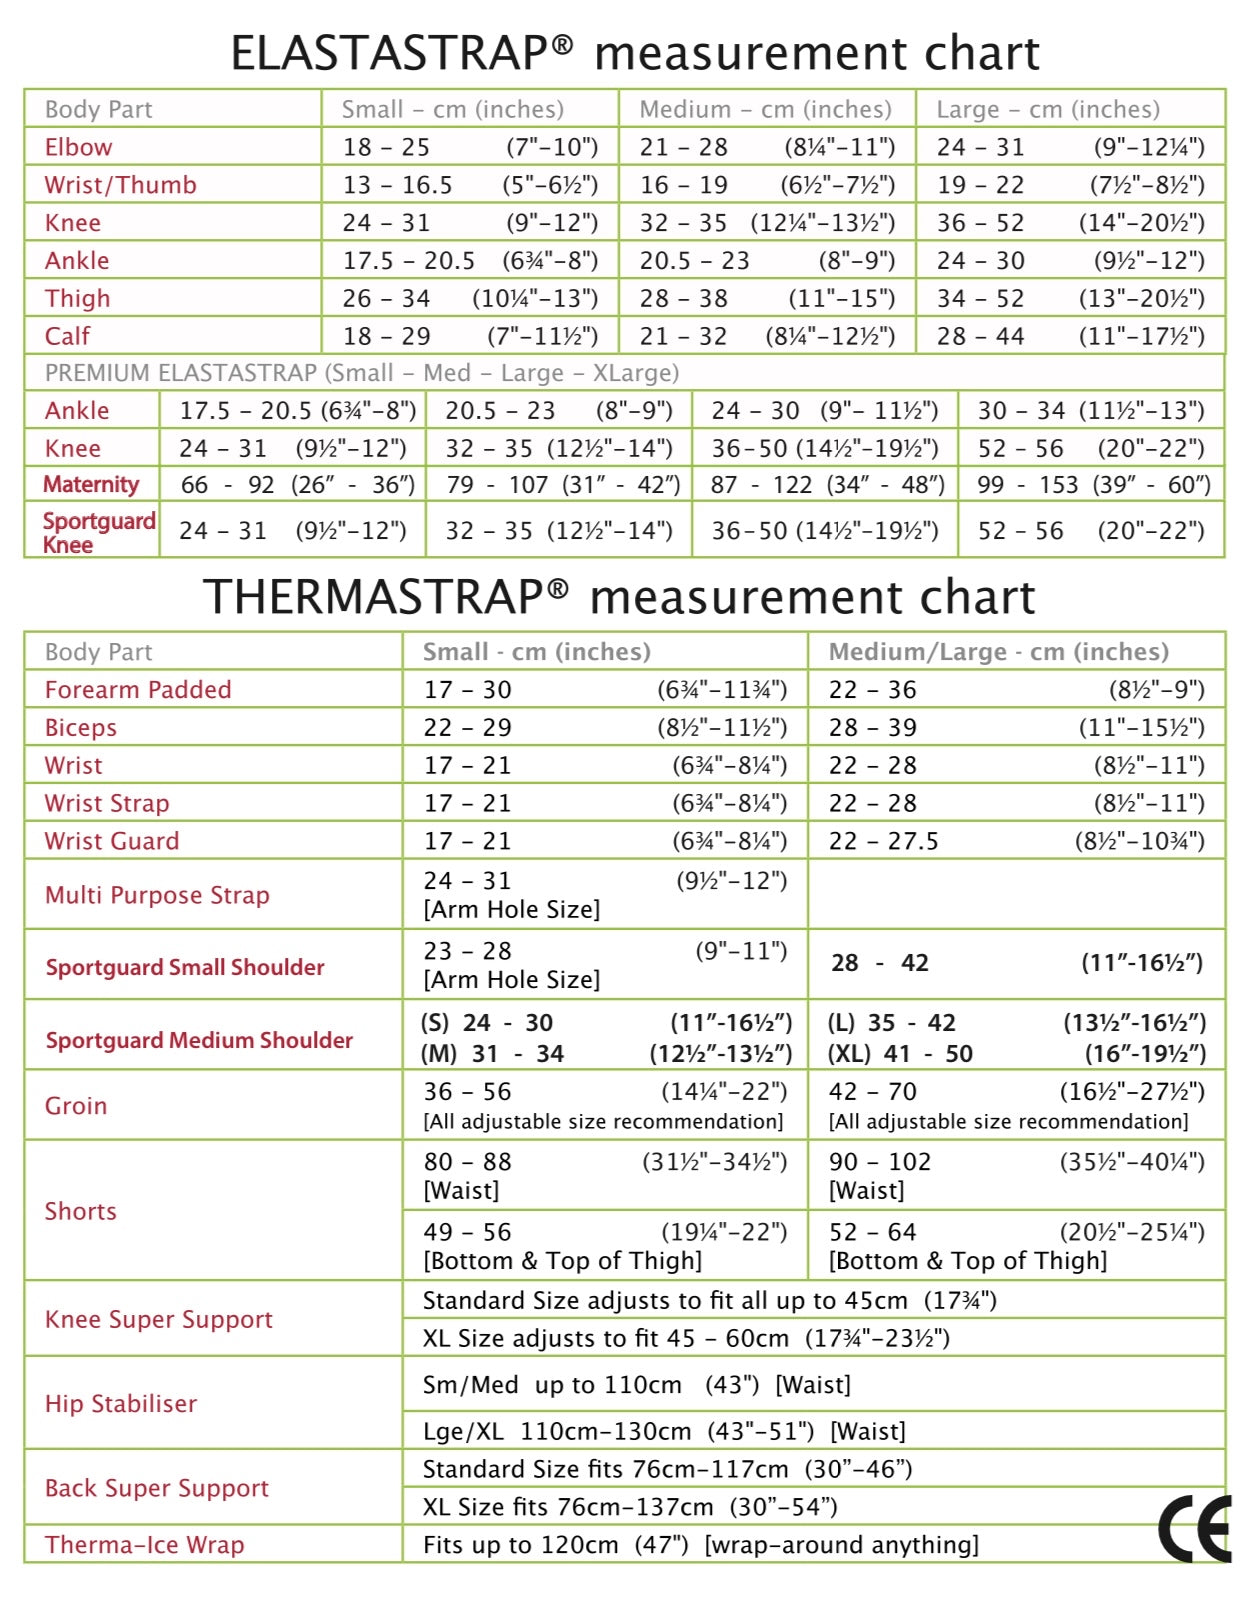 Thermastrap Back Support